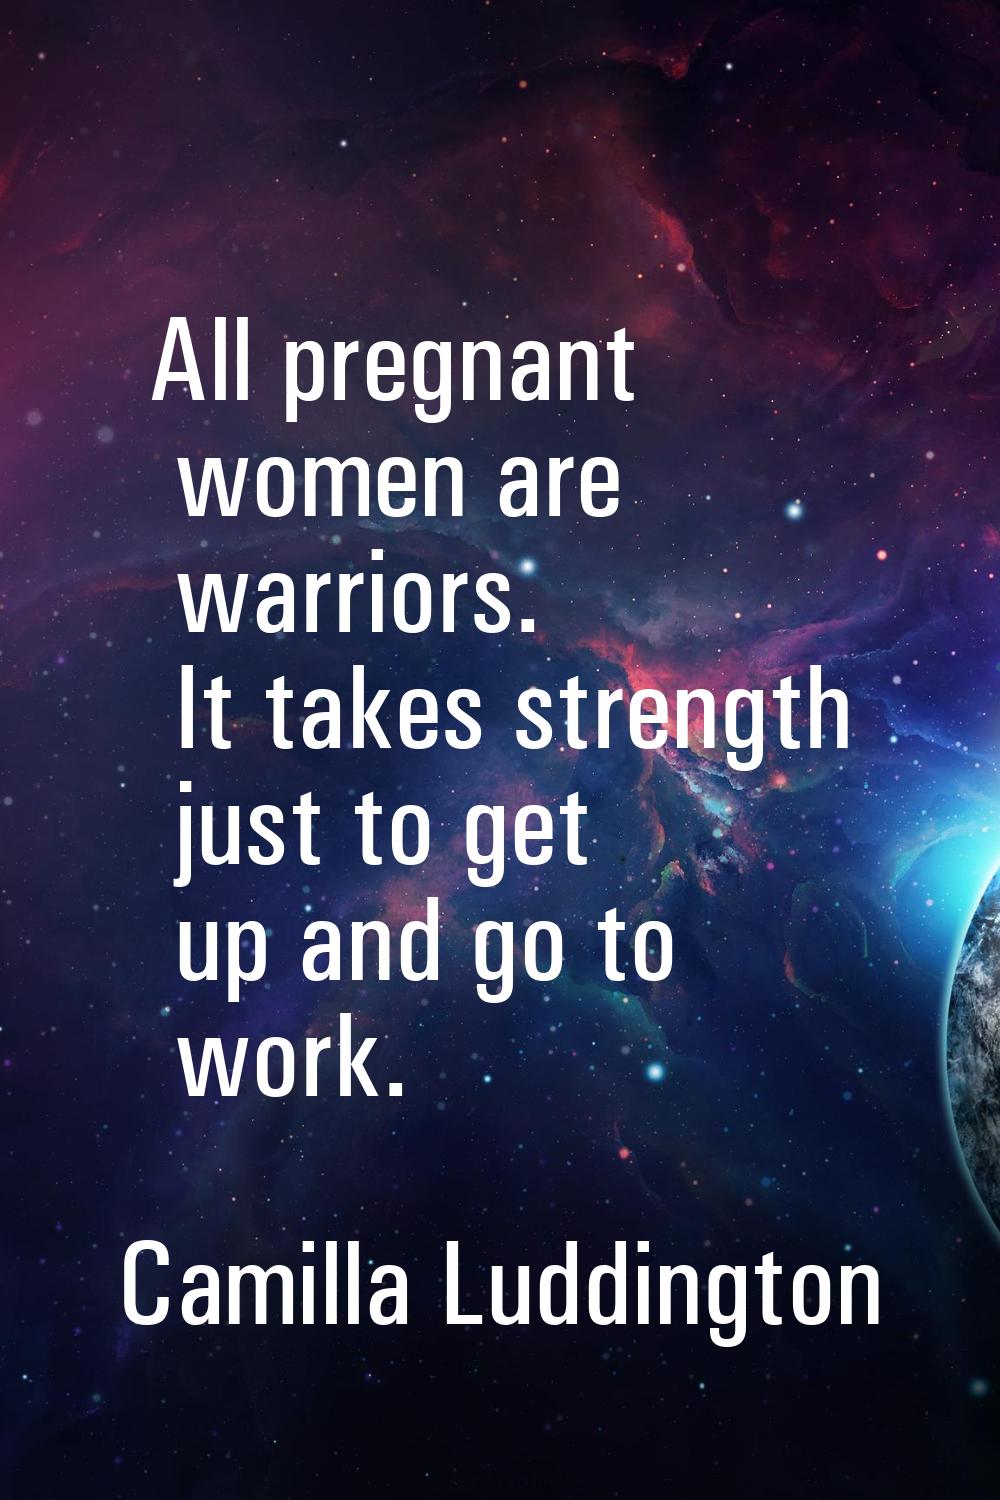 All pregnant women are warriors. It takes strength just to get up and go to work.